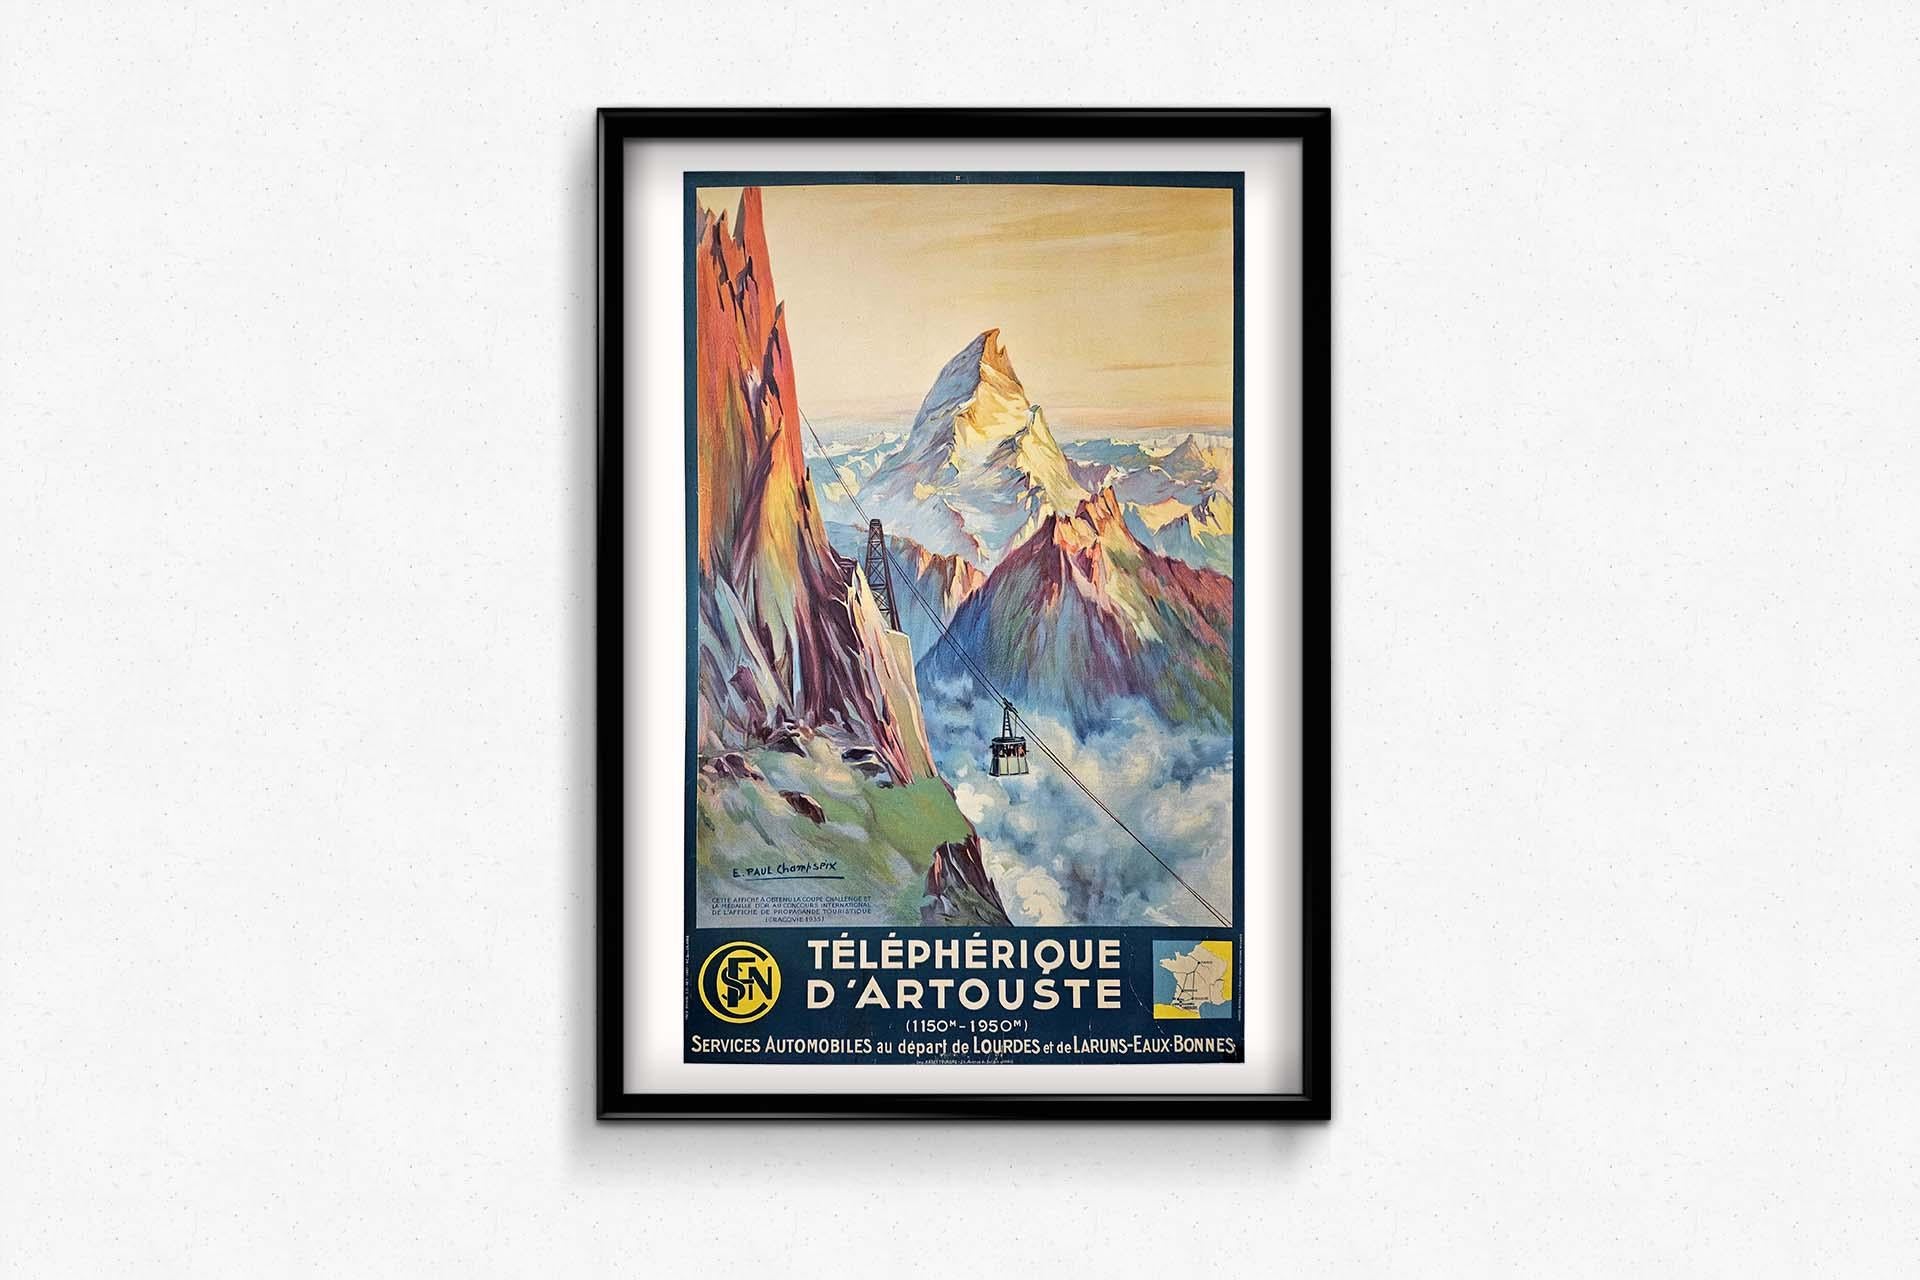 The circa 1947 original travel poster by Paul Champseix for SNCF (French National Railway Company) promoting the Téléphérique d'Artouste and related automobile services departing from Lourdes and Laruns Eaux Bonnes offers a captivating glimpse into